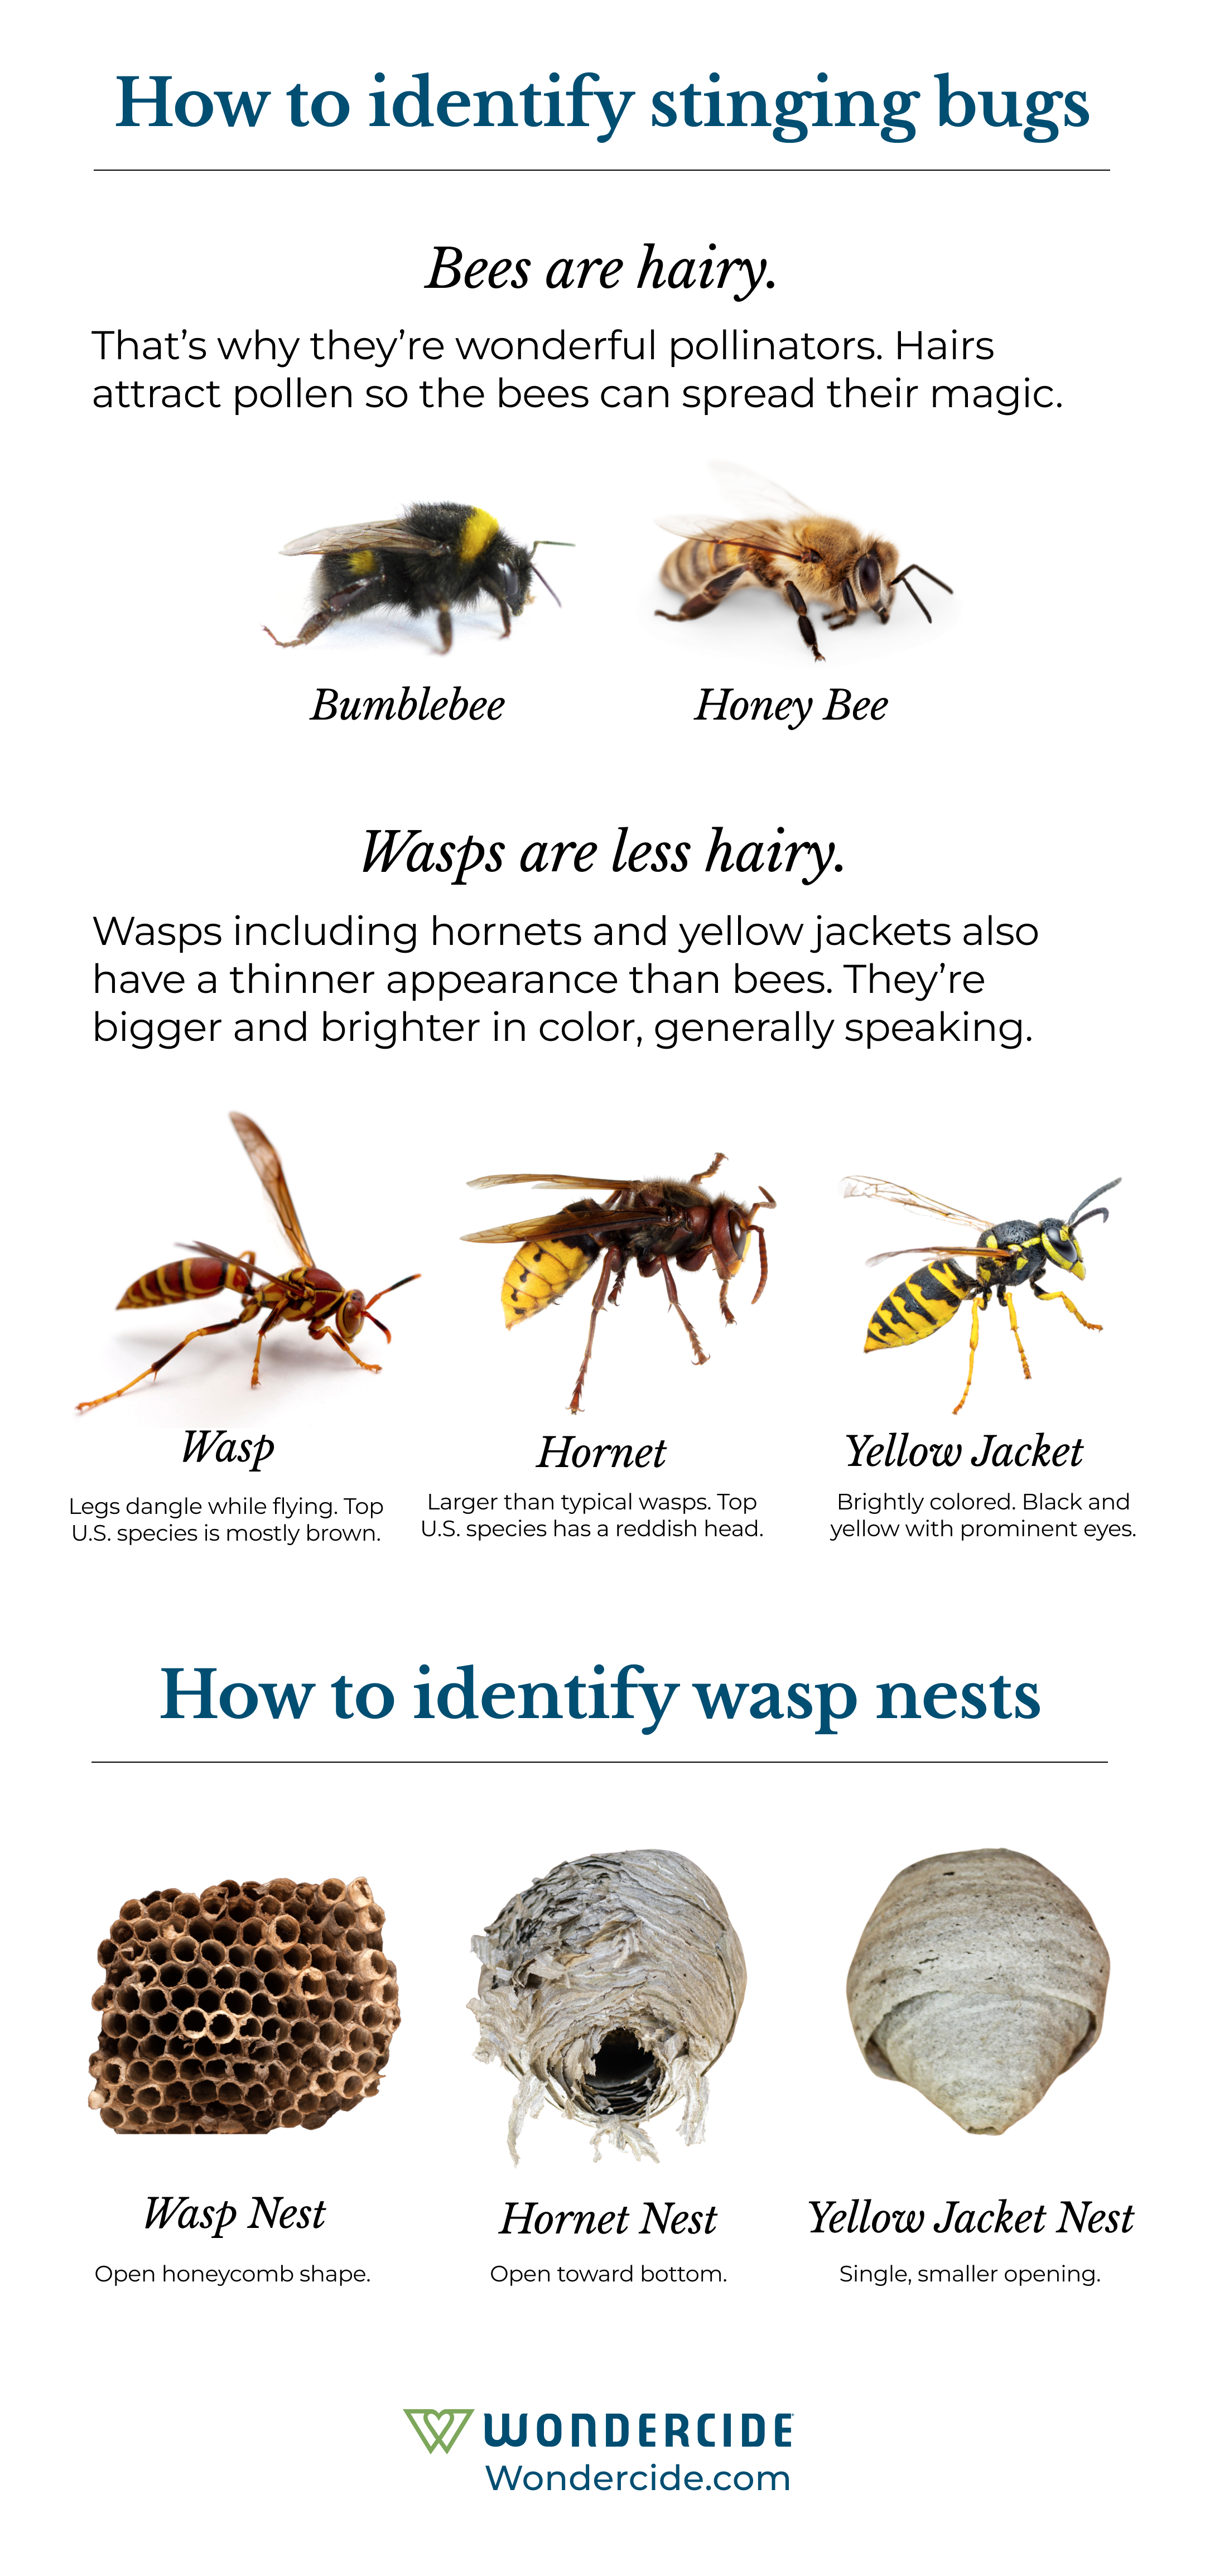 How to identify bees and wasps